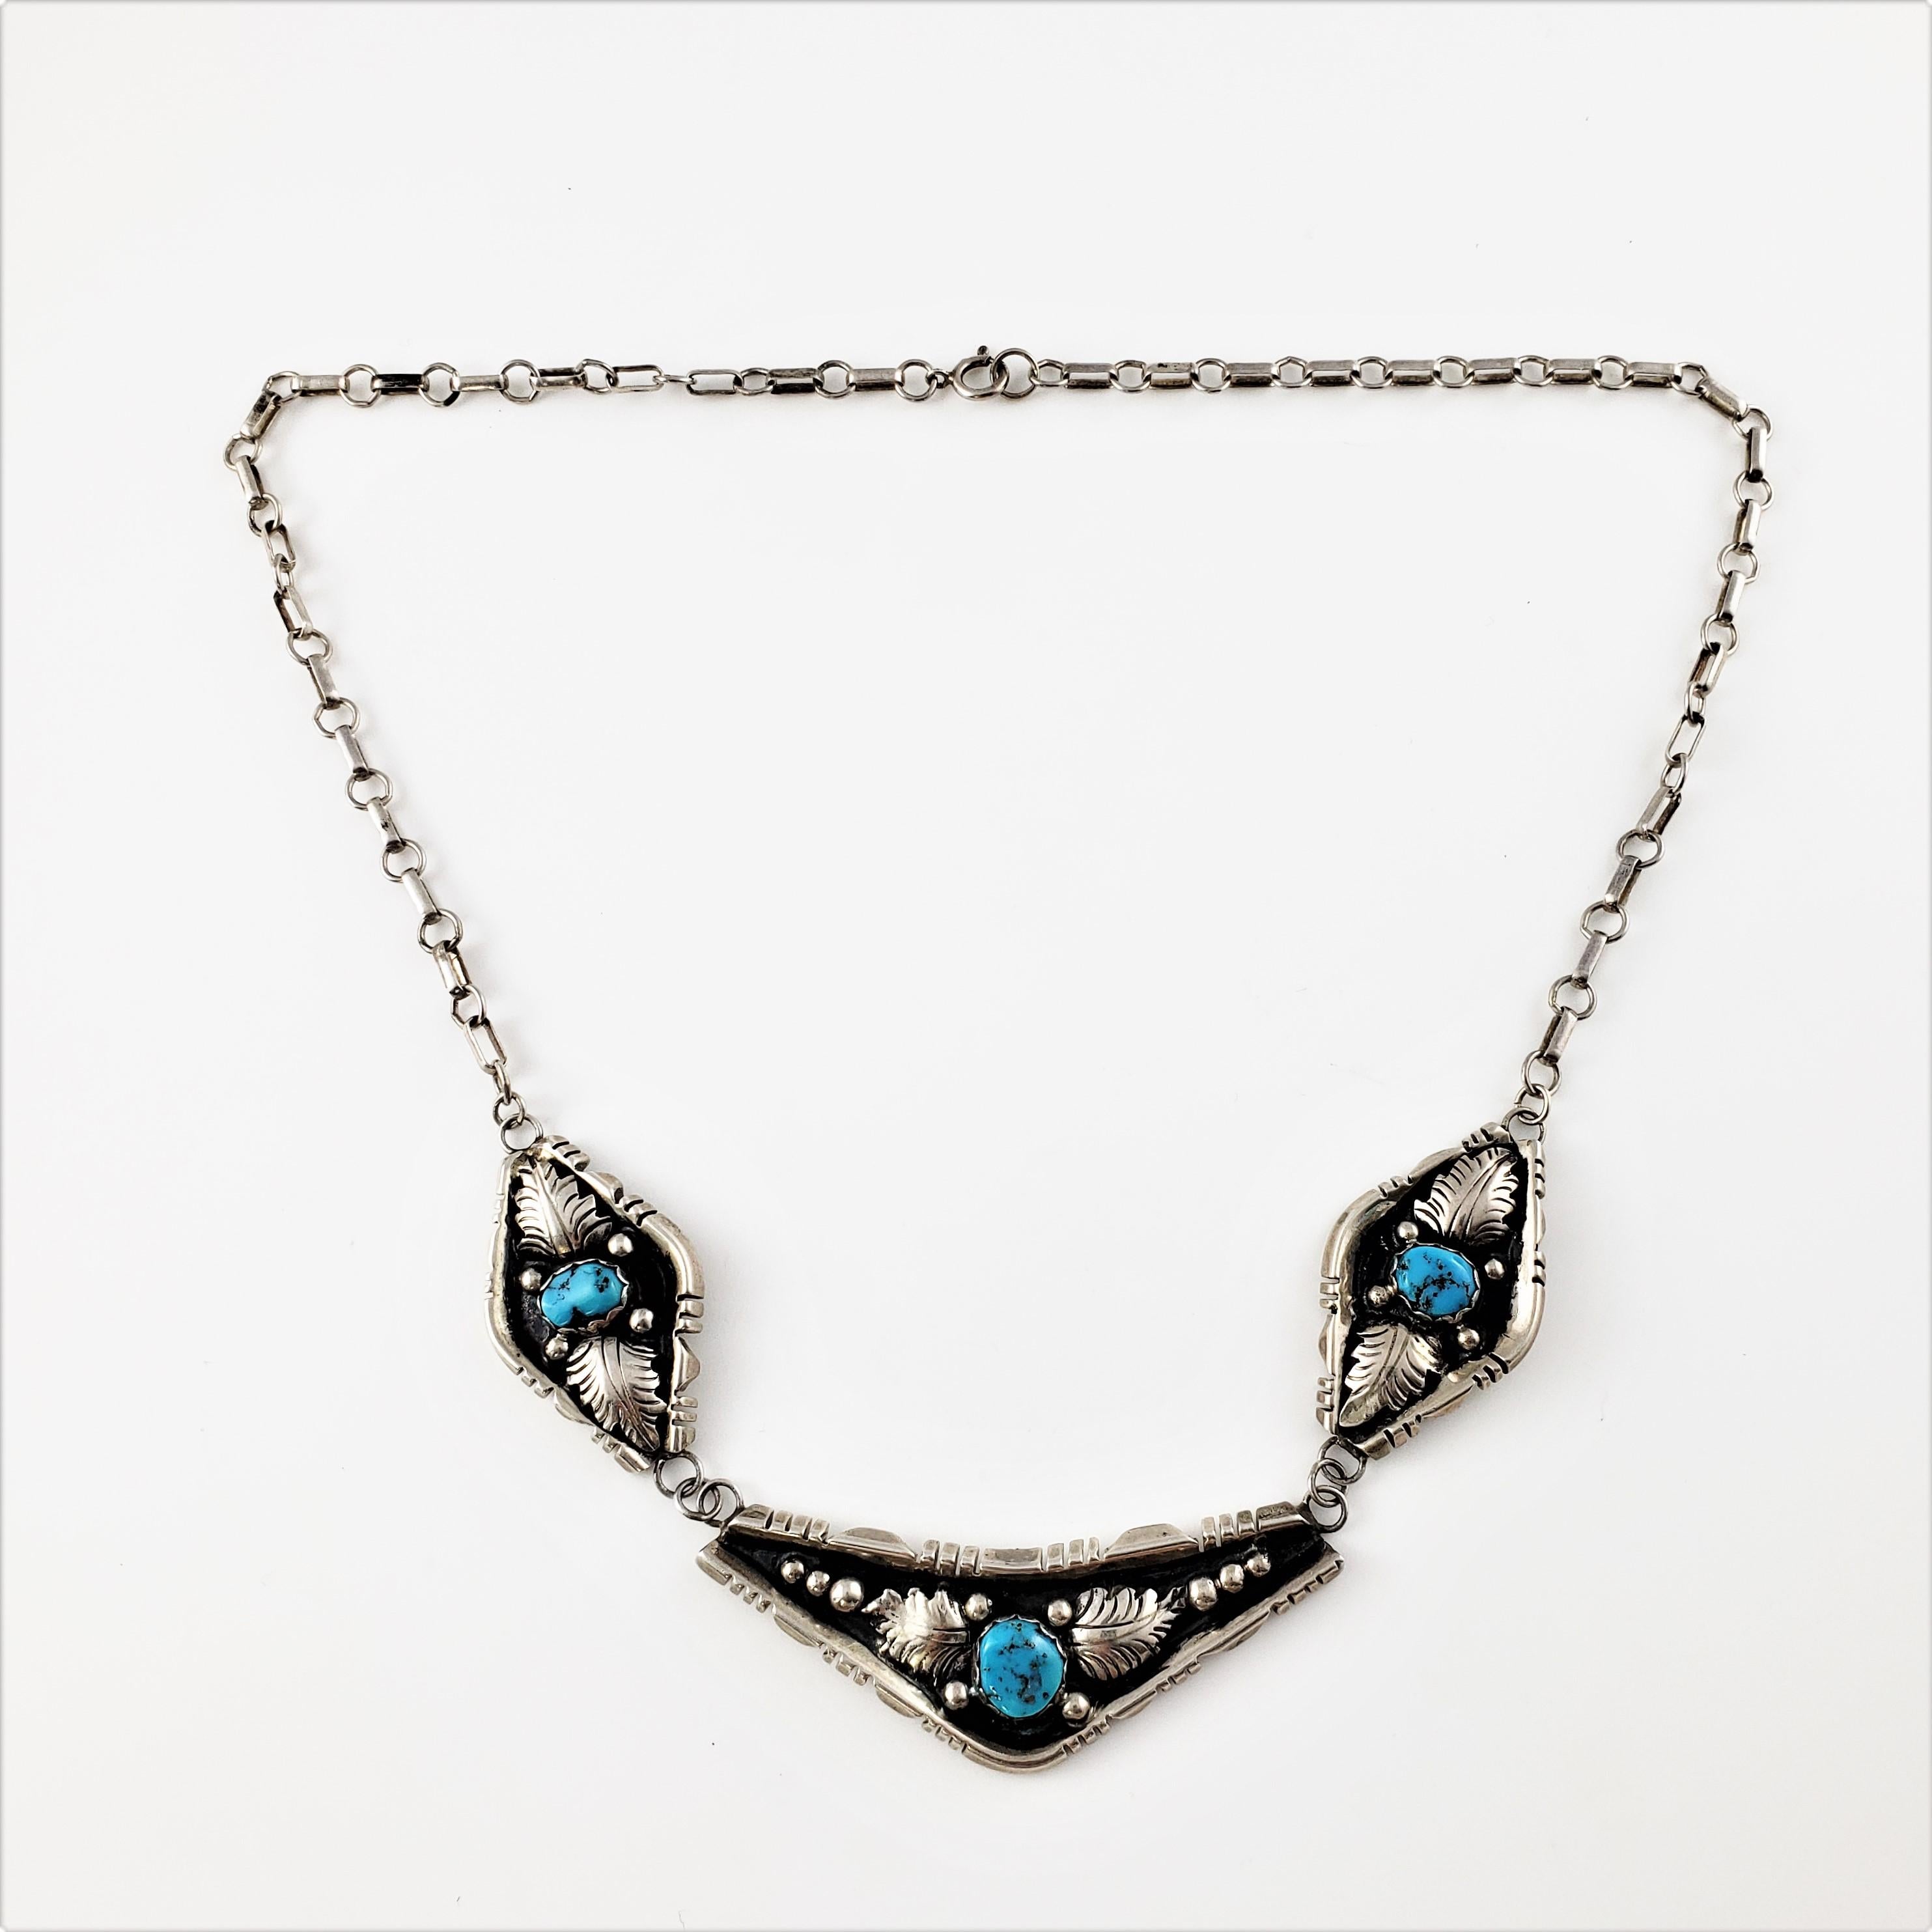 Vintage Native American Sterling Silver Oxidized Turquoise 3 Panel Link Necklace-

This lovely Native American three panel necklace features three turquoise stones (center; 10 mm x 9 mm, sides: 10 mm x 7 mm each) set in sterling silver.

Size: